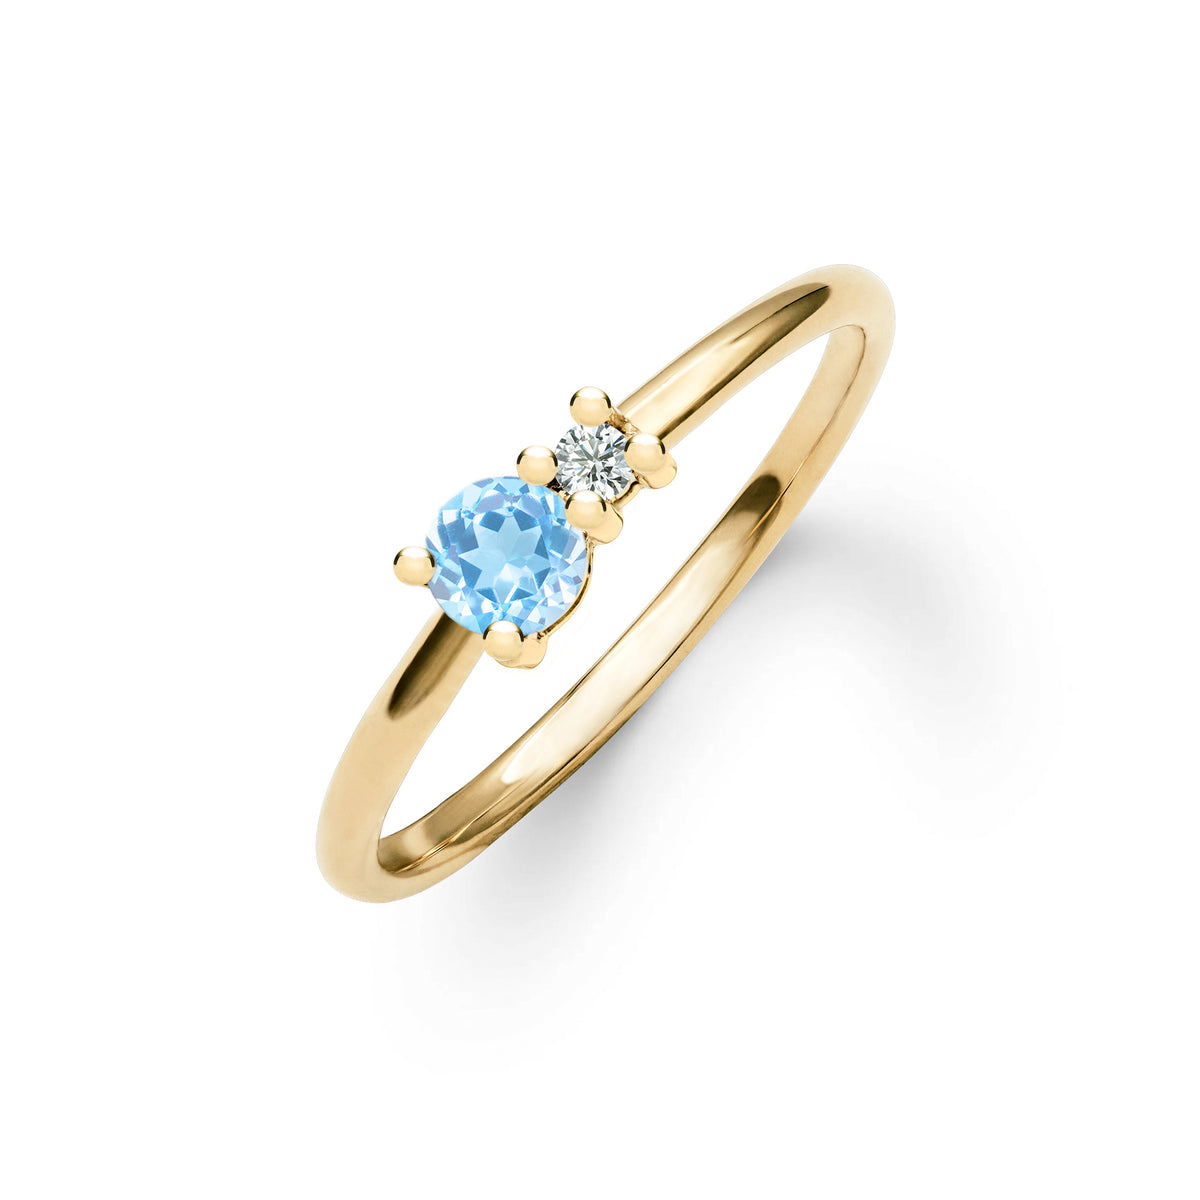 London blue topaz engagement ring set solid 14k rose gold diamond halo –  WILLWORK JEWELRY